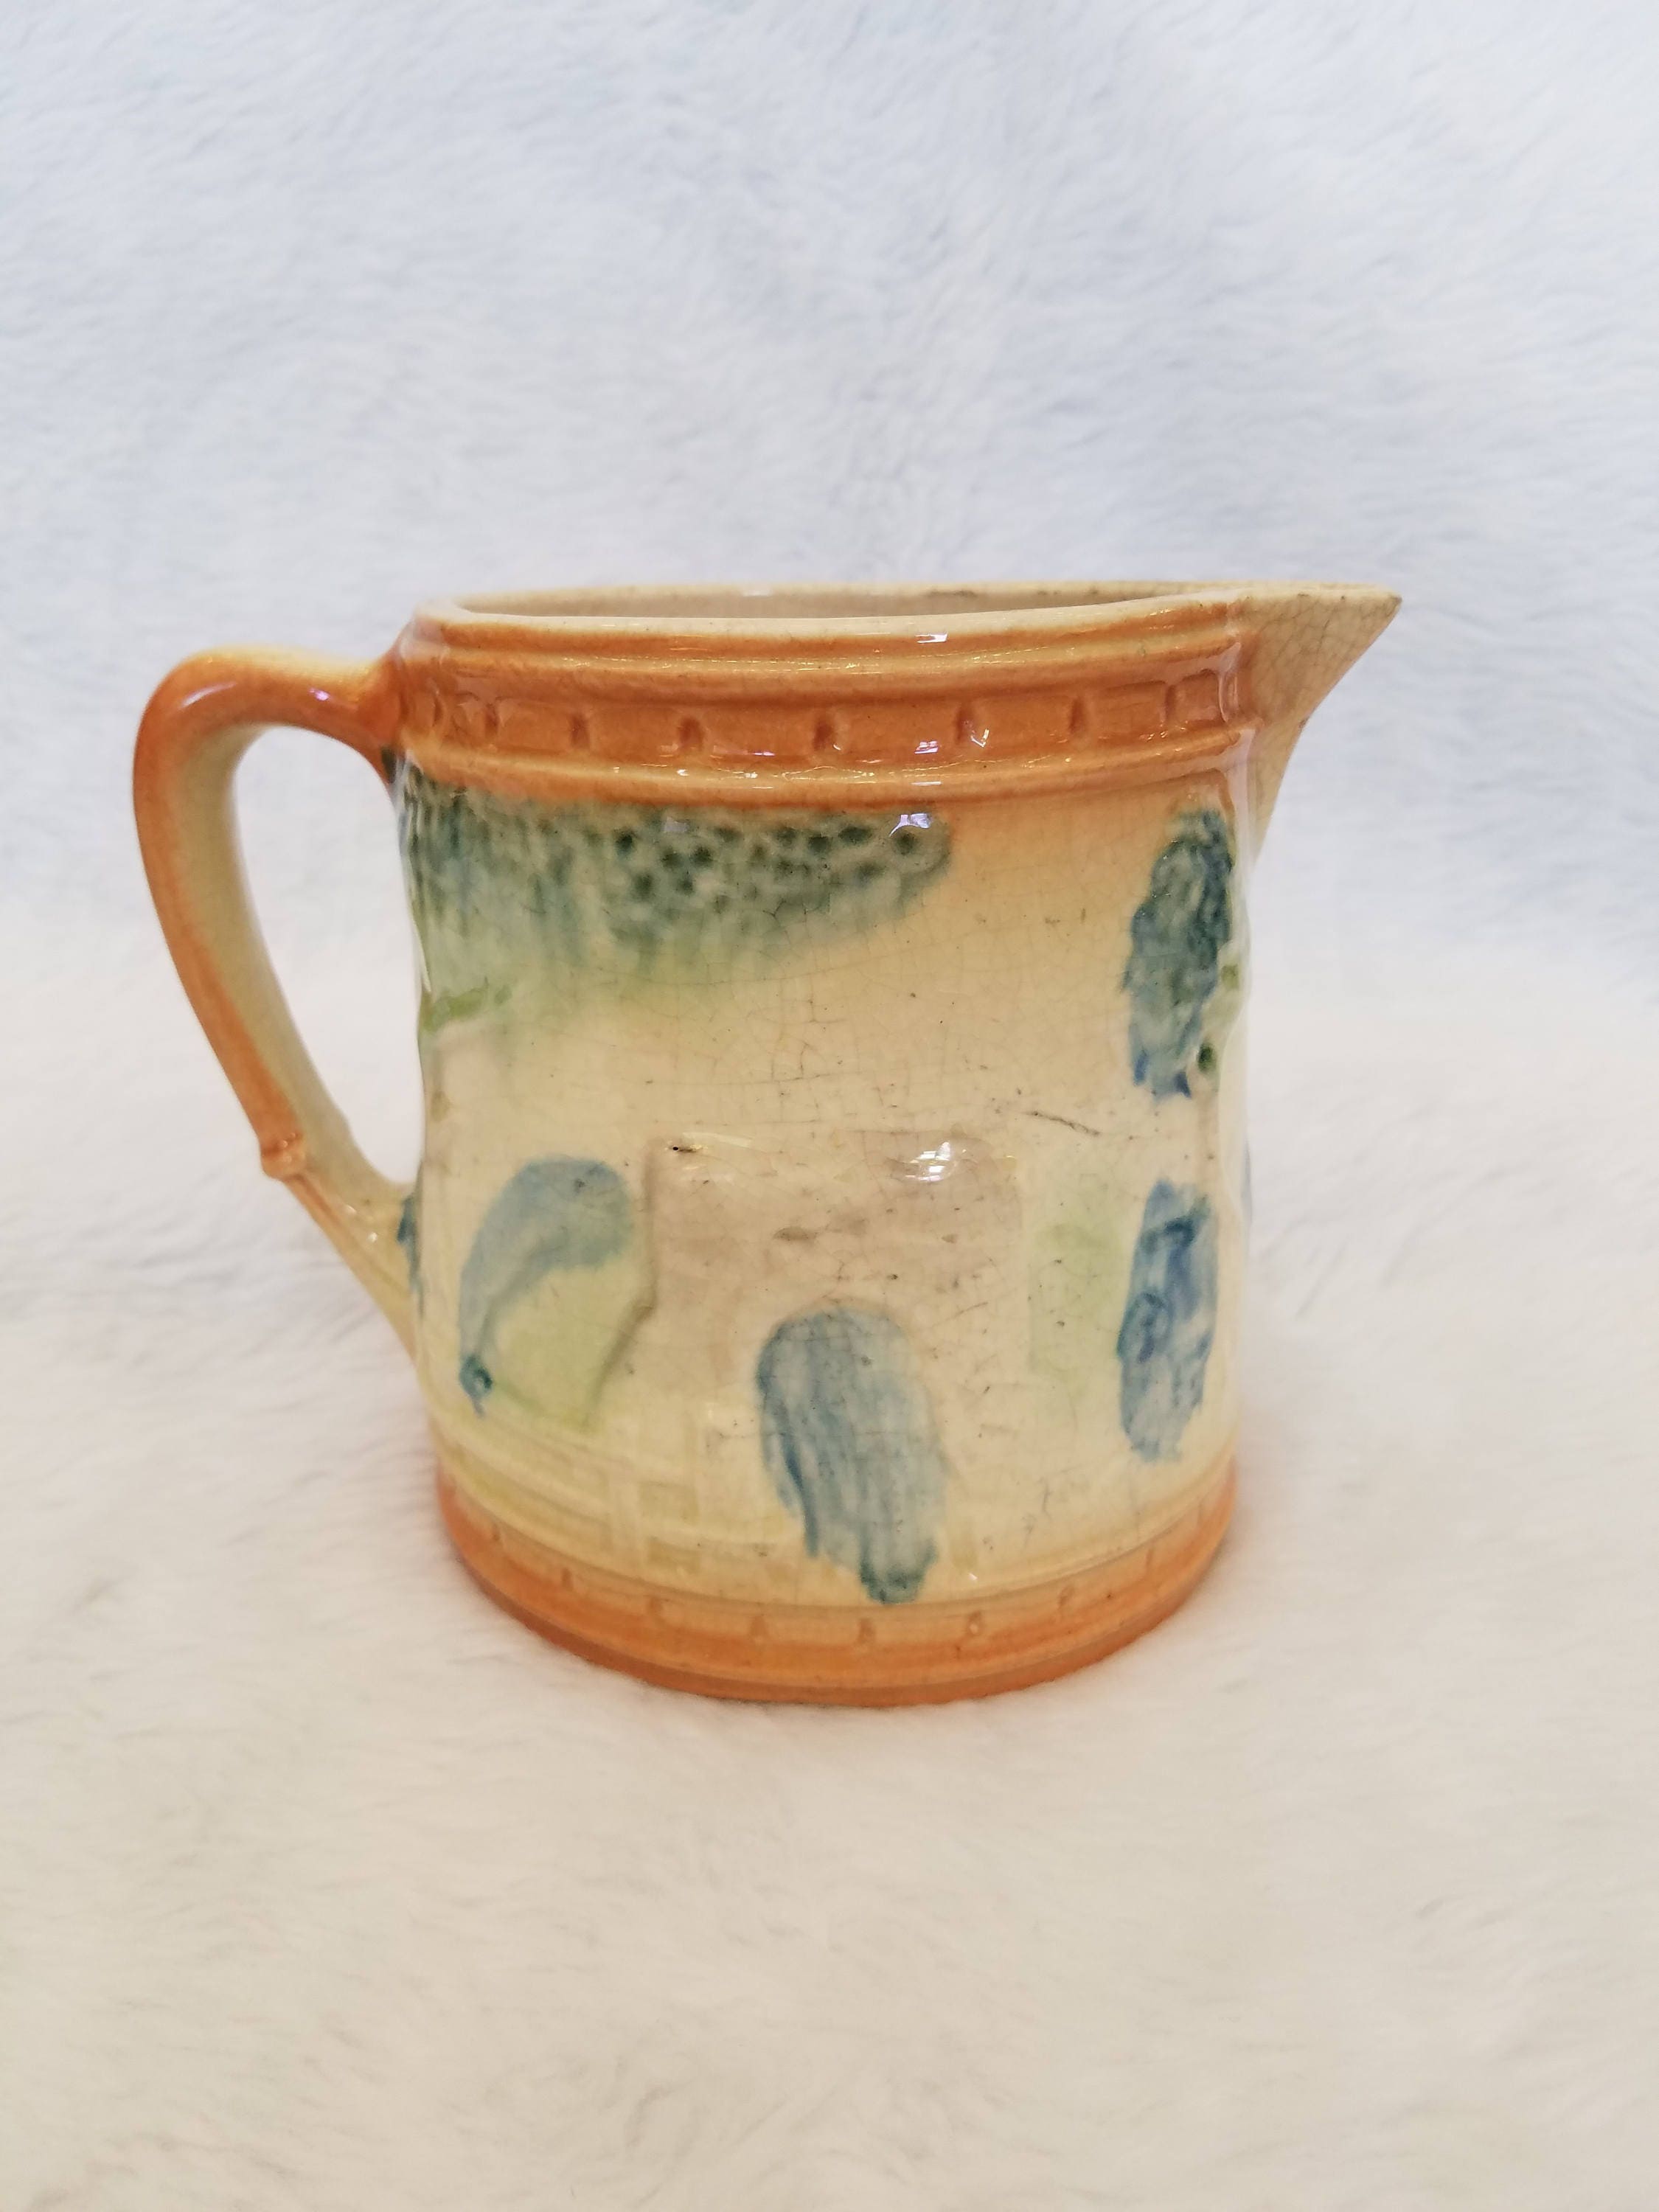 Roseville Pottery early unmarke 822 pitcher The